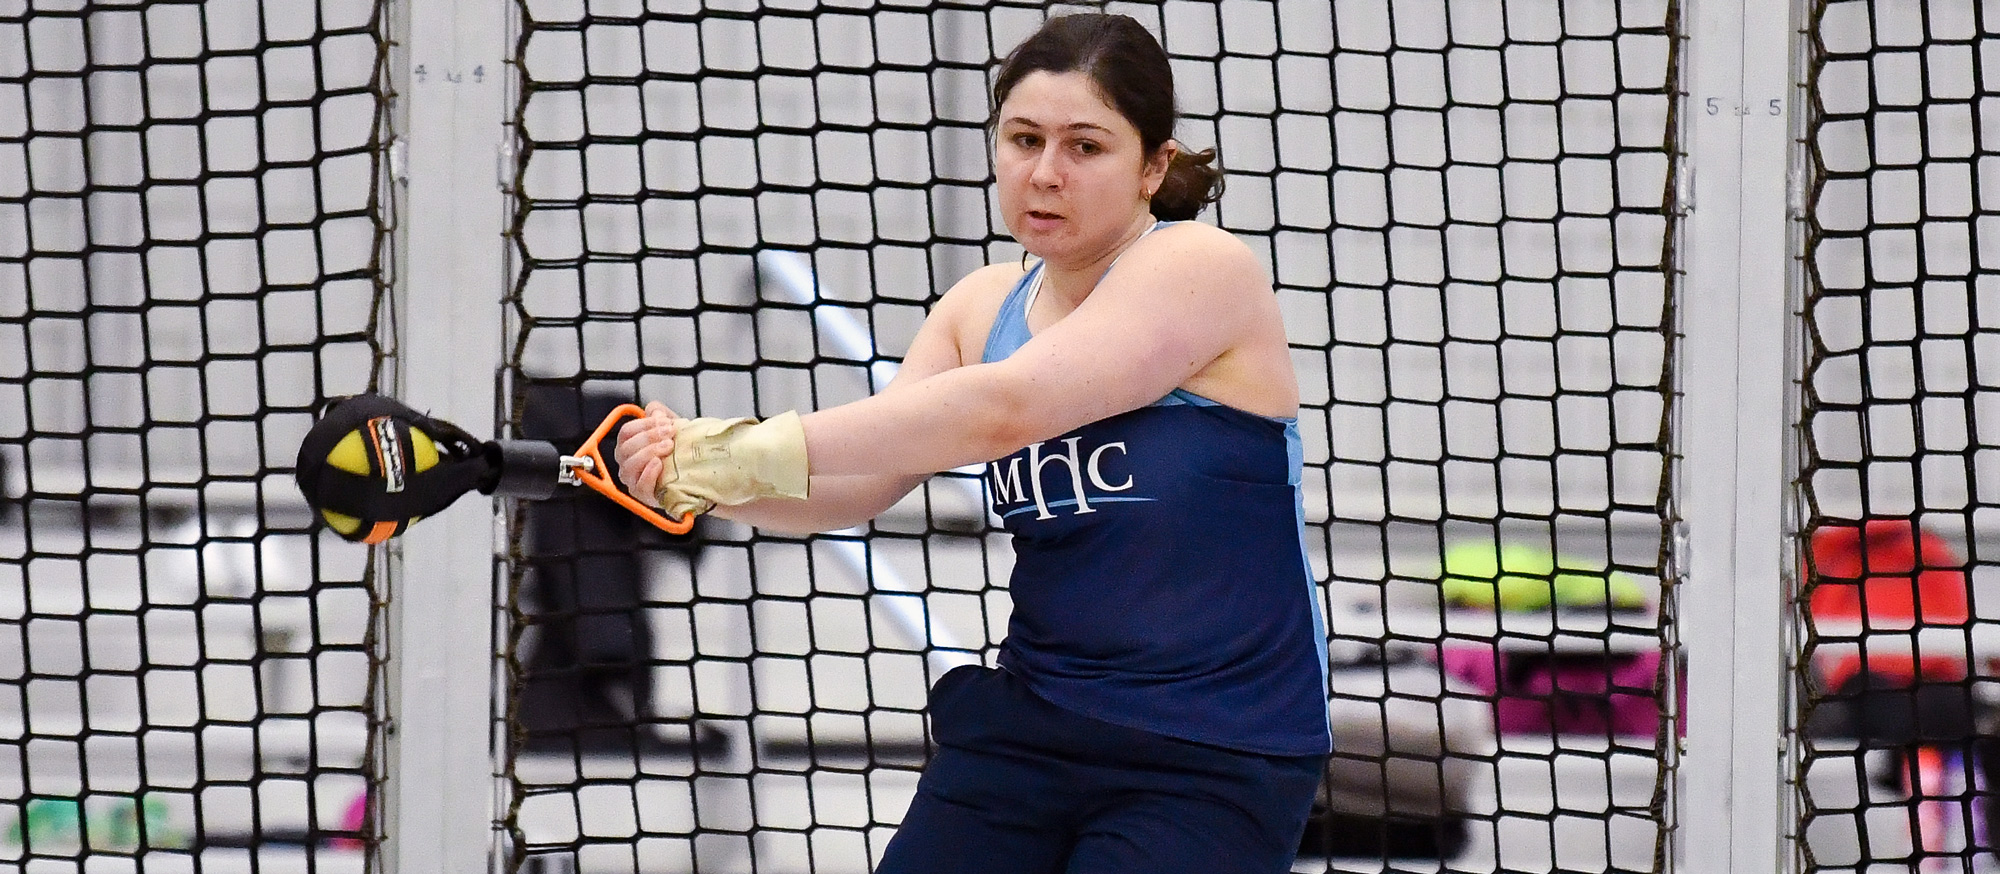 Erin Siegel tied for 10th place in team history in the weight throw at the Wesleyan Invitational on Jan. 28, 2023. (RJB Sports file photo)